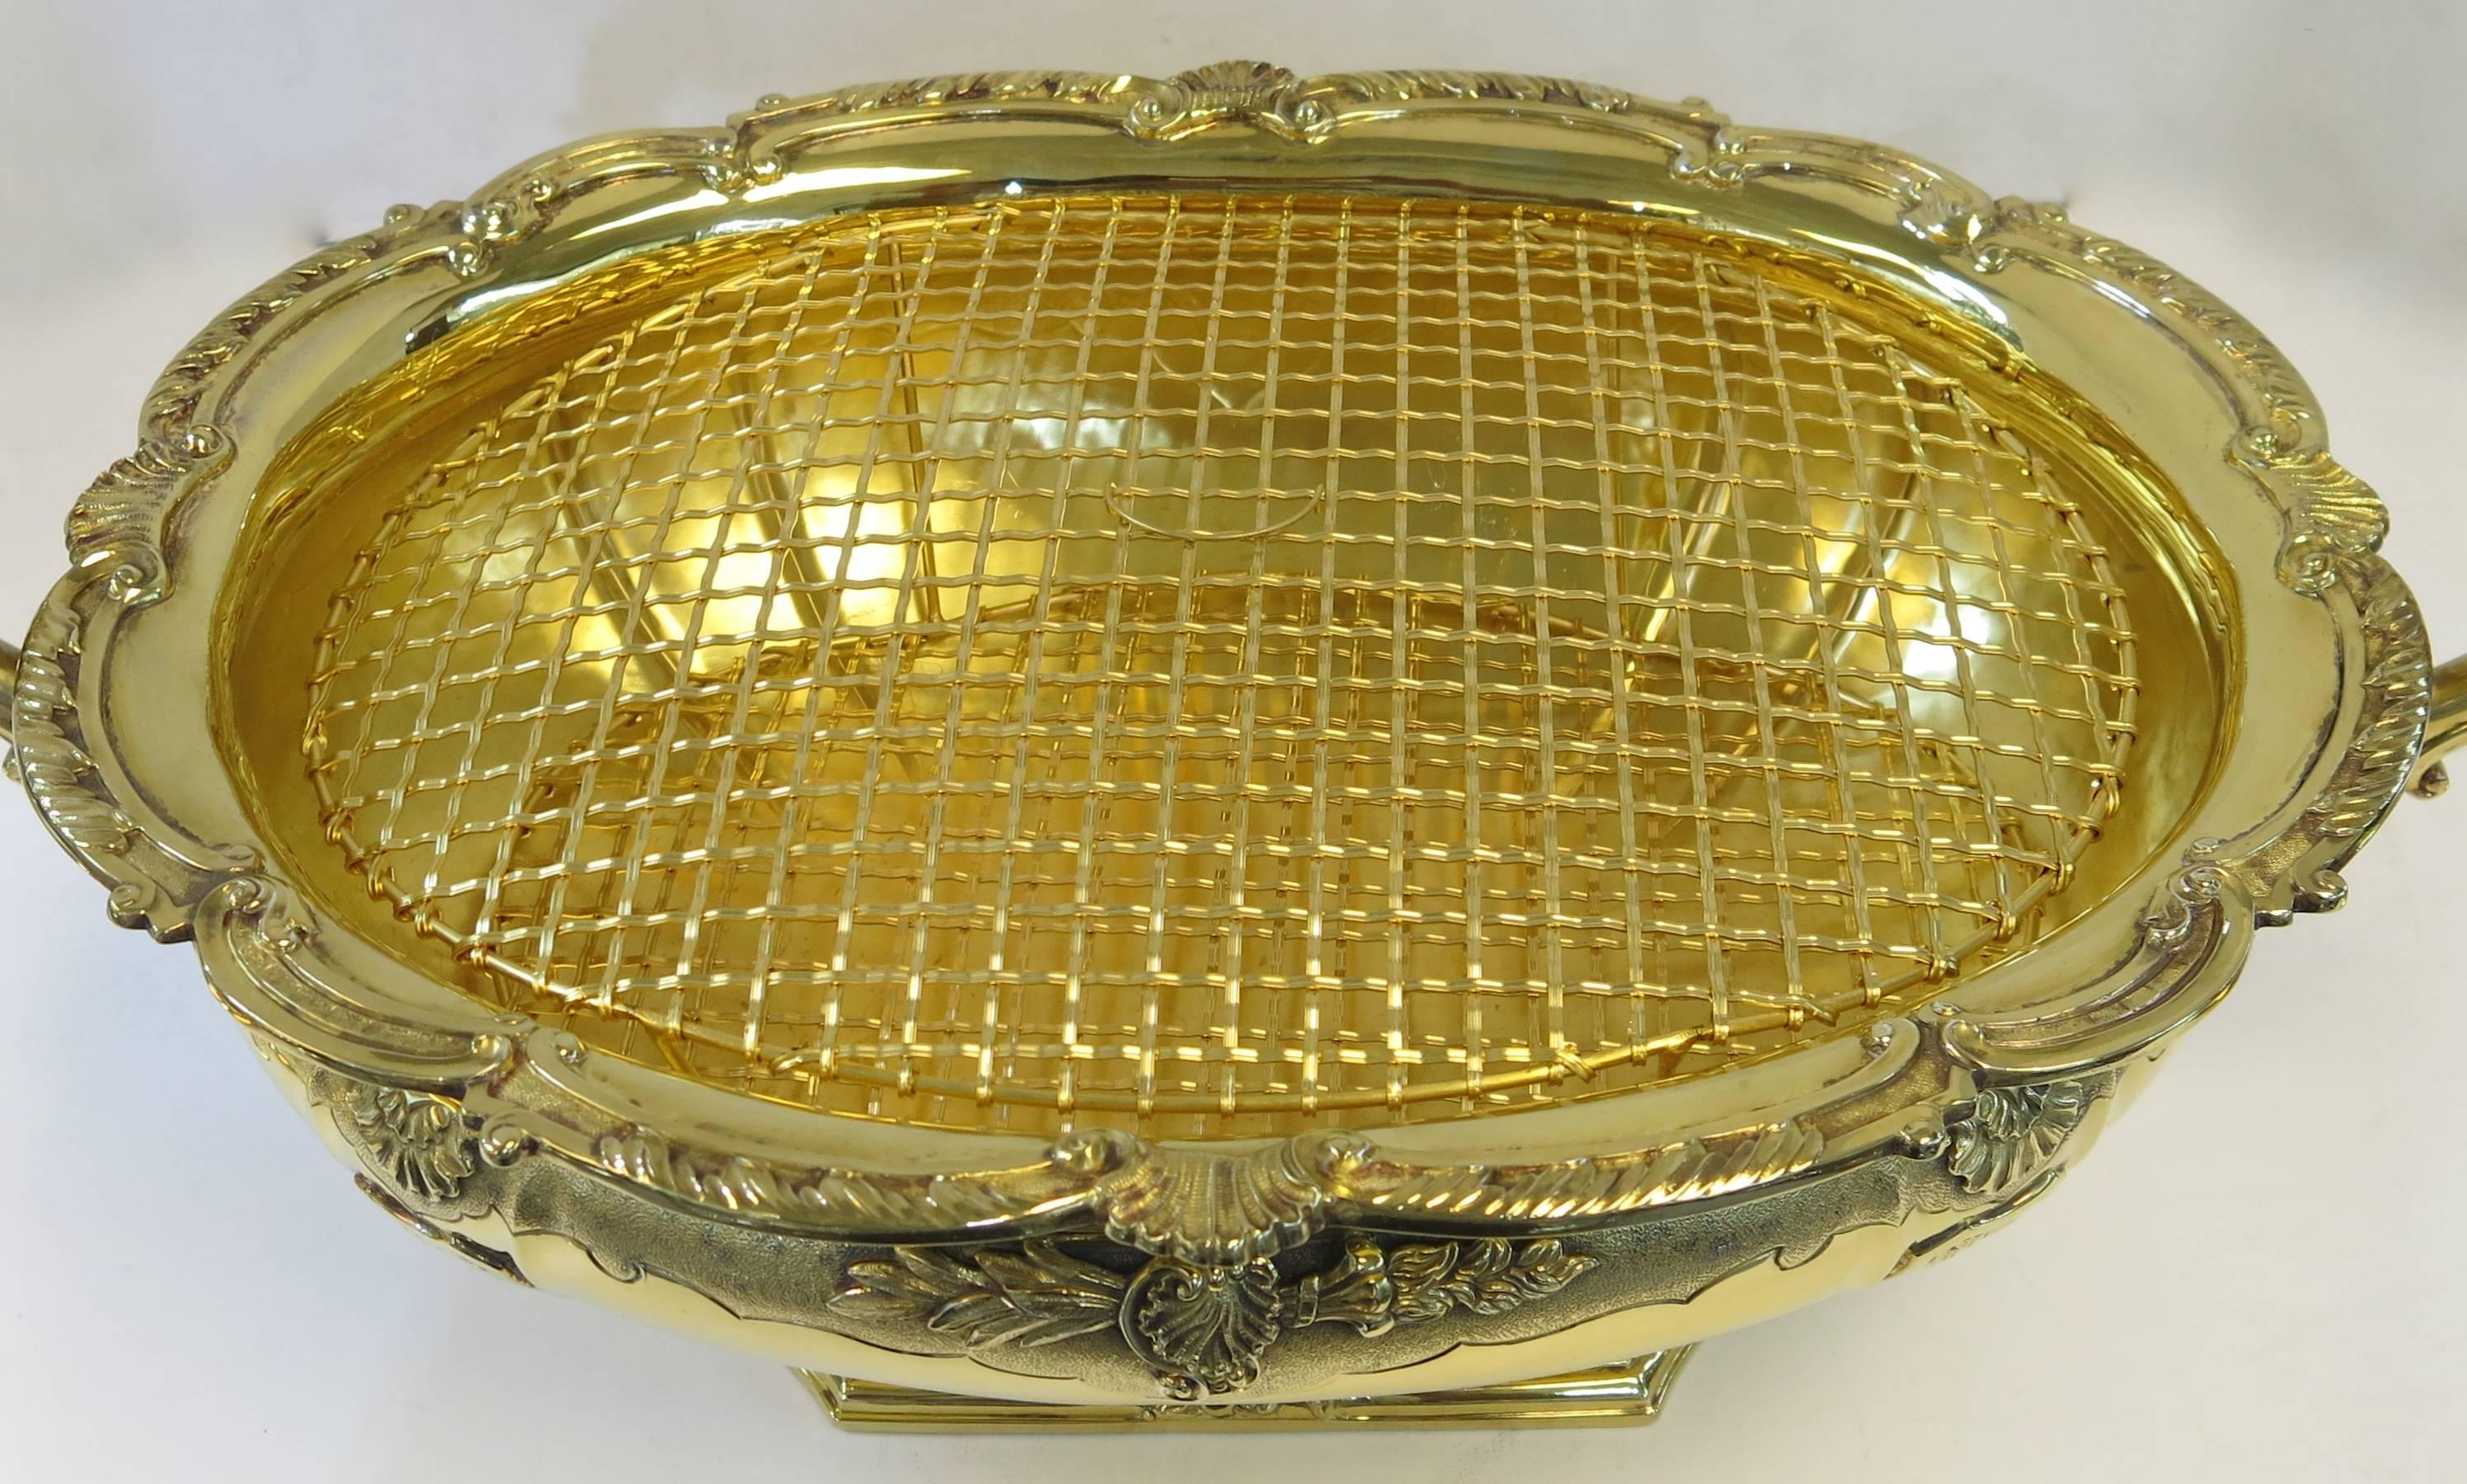 Custom made, sterling silver gilt, oval centrepiece or tureen, made with removable parts so that it can be used for a multitude of uses. Soup tureen, centrepiece, wine or champagne cooler, punch bowl, jardinière, fruit bowl etc. Handmade, in London,